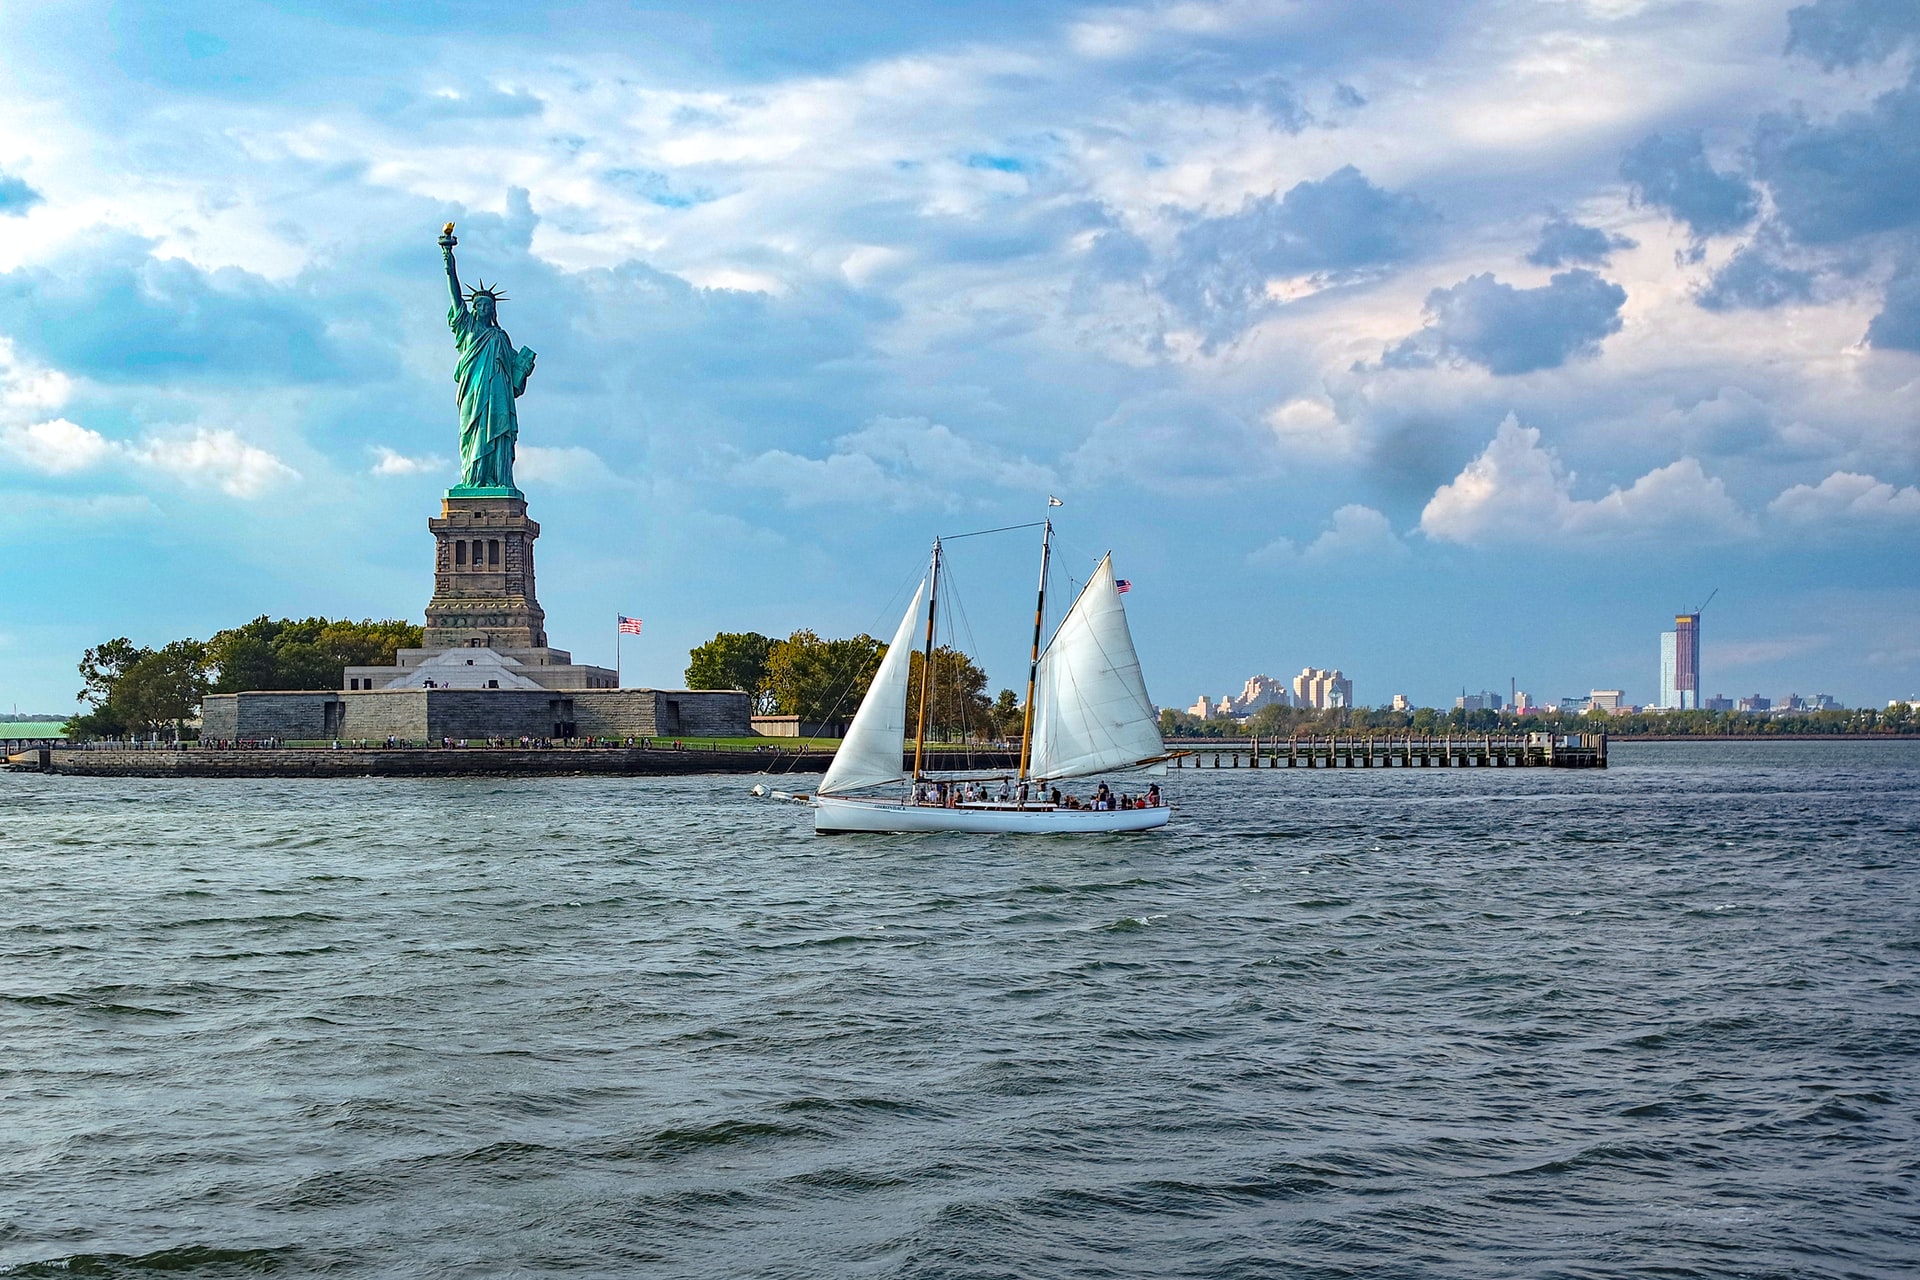 Statue of Liberty from boat